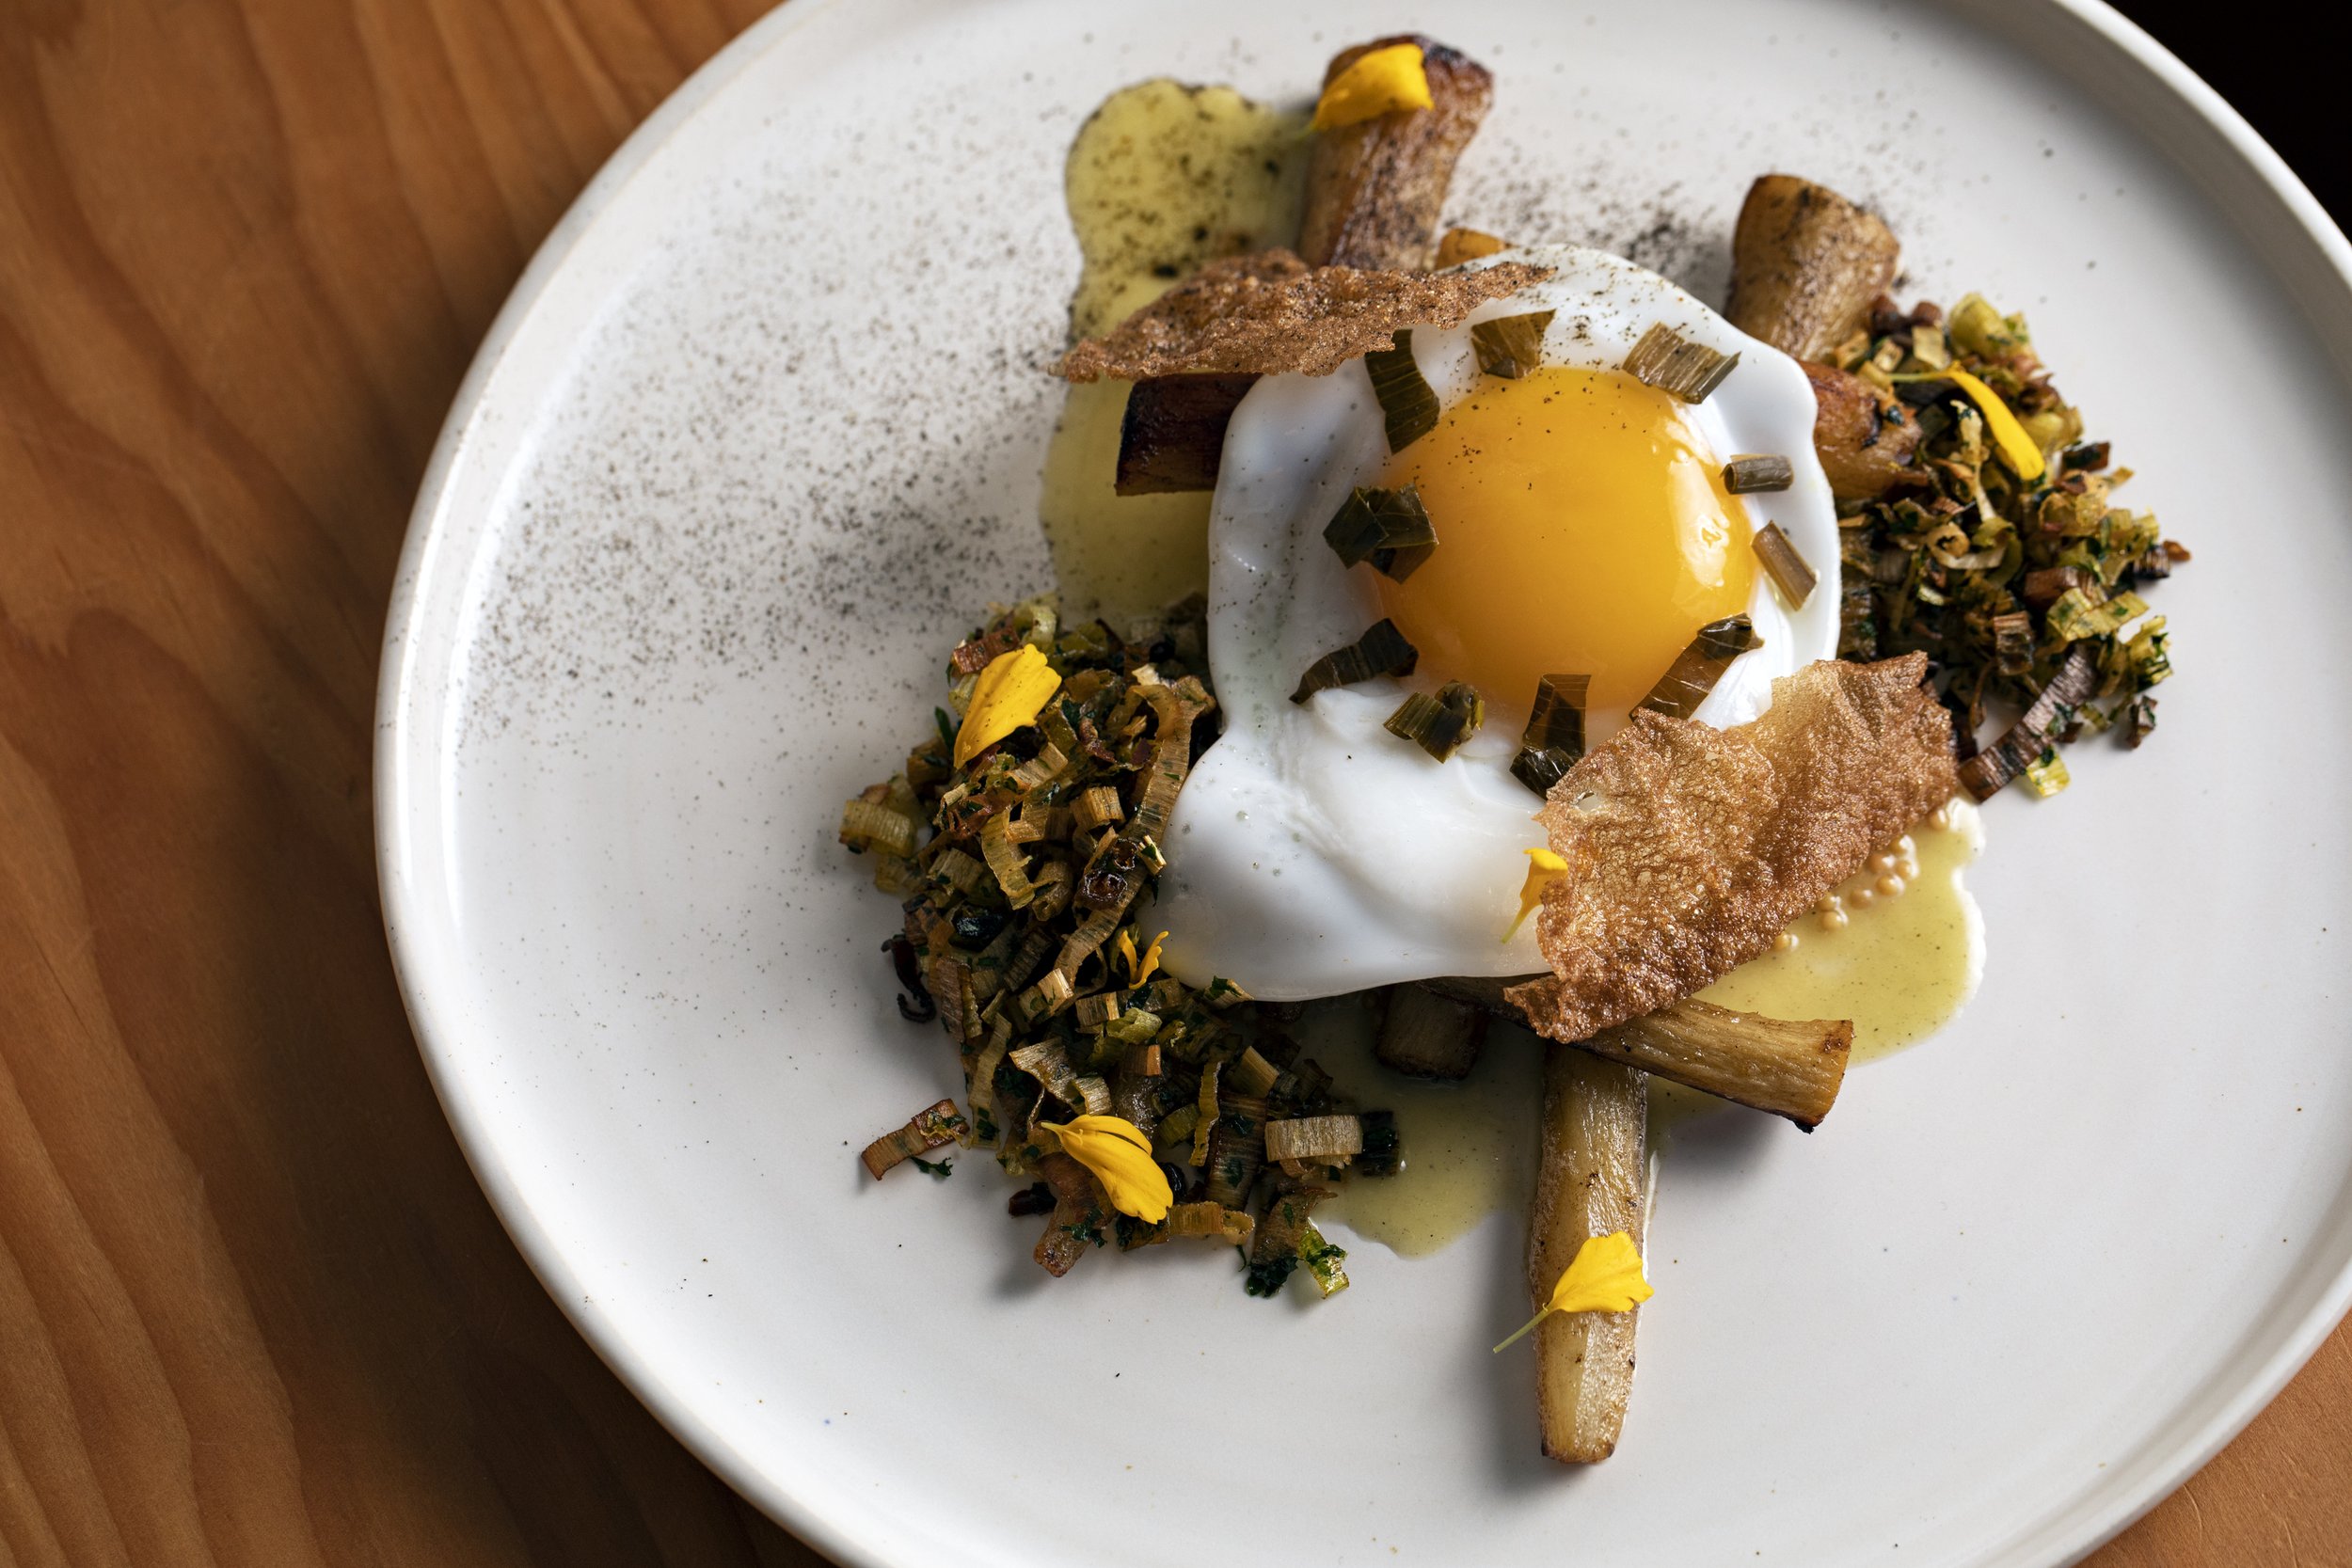 Pan roasted salsify topped with duck egg